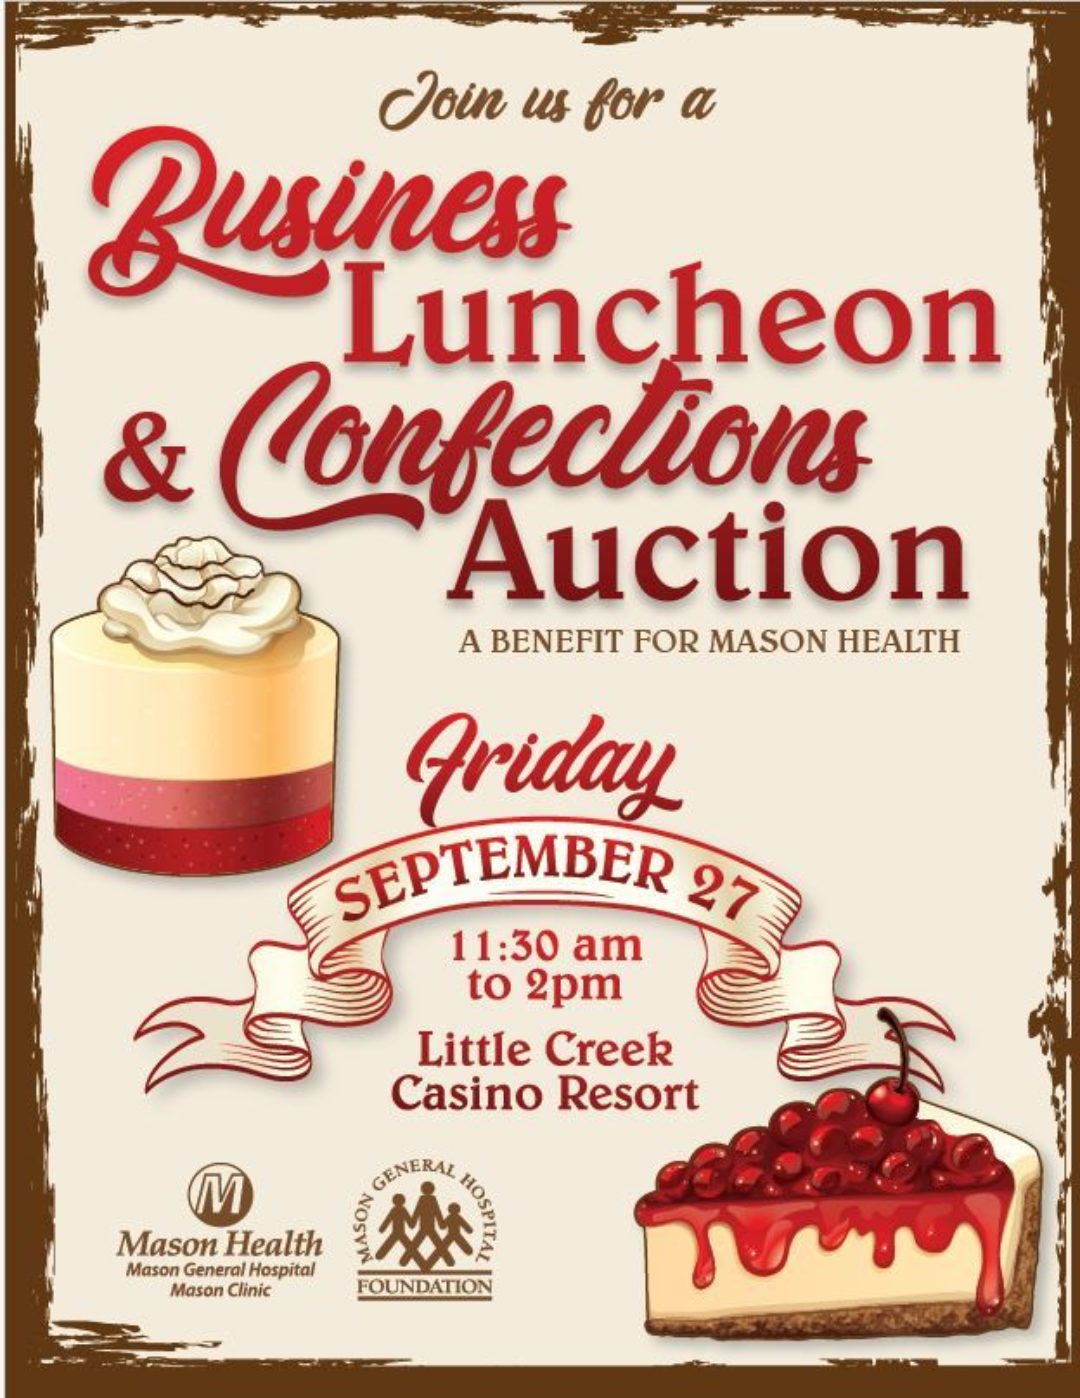 Business Lunch Save the Date image